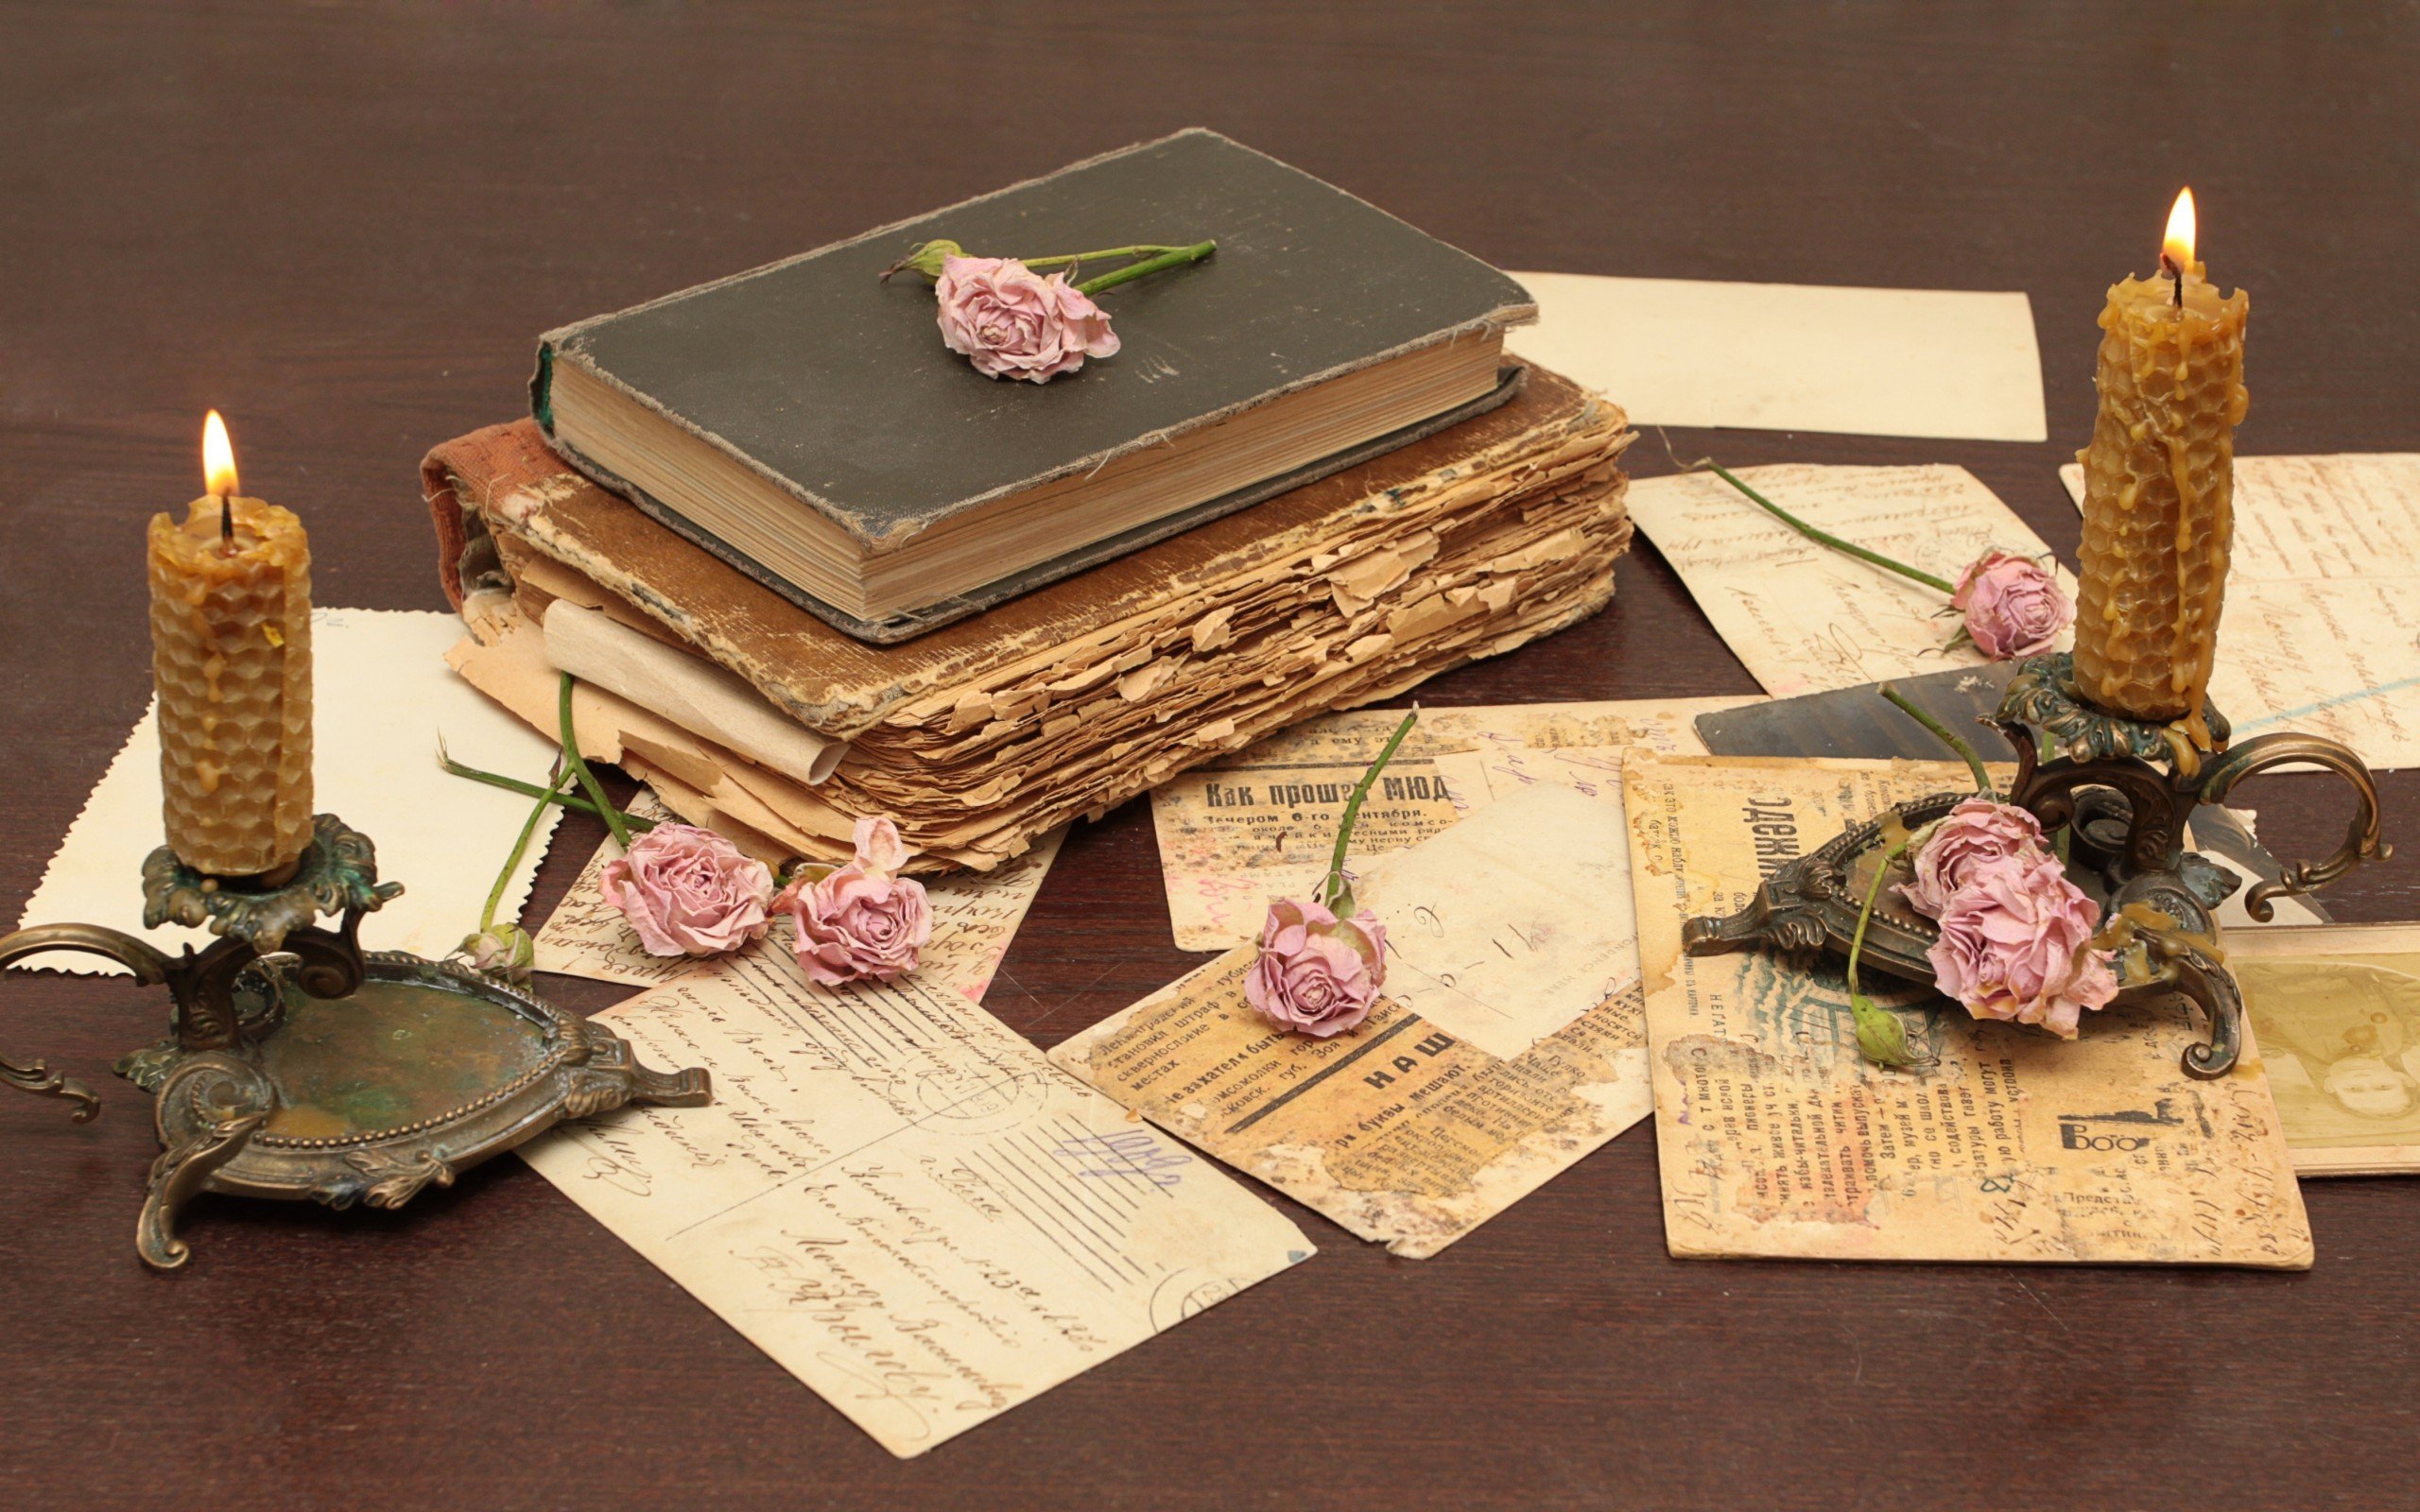 cards, Paper, Flowers, Vintage, Old, Books, Letters, Candles, Roses Wallpaper